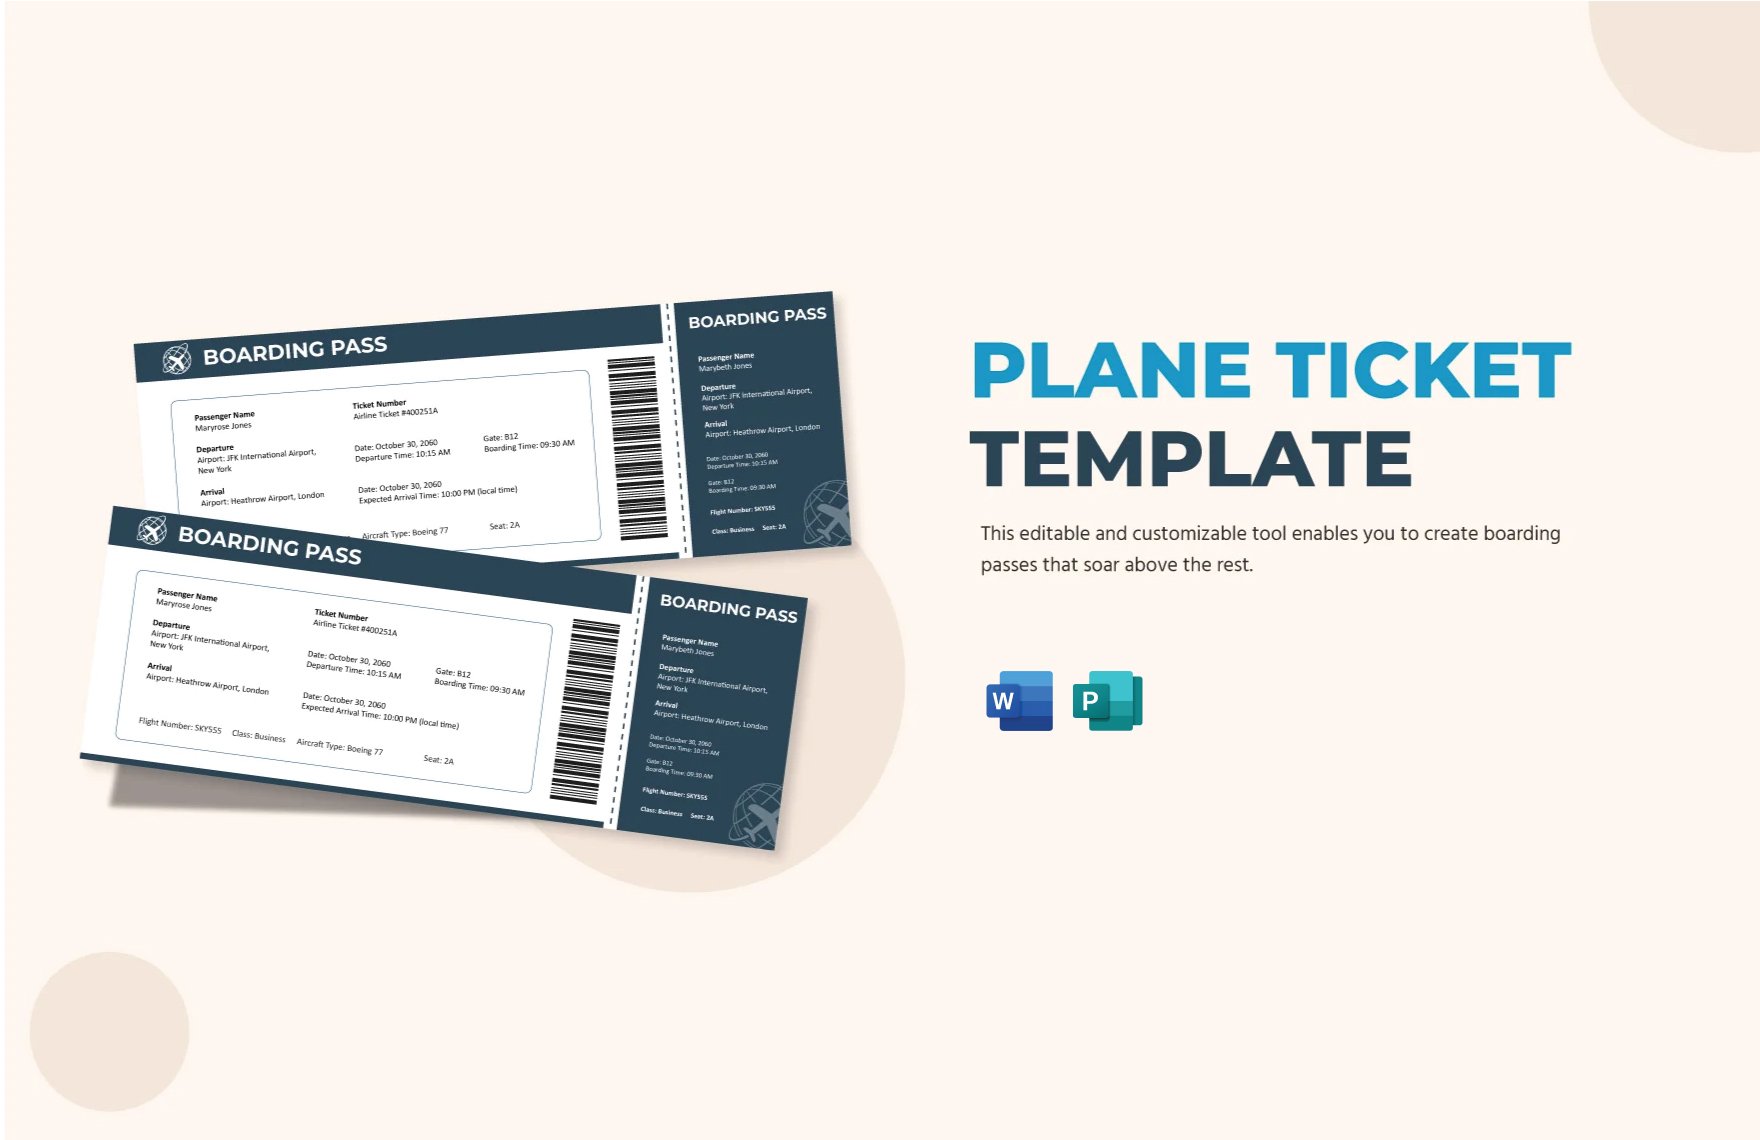 Plane Ticket Template in Word, Publisher